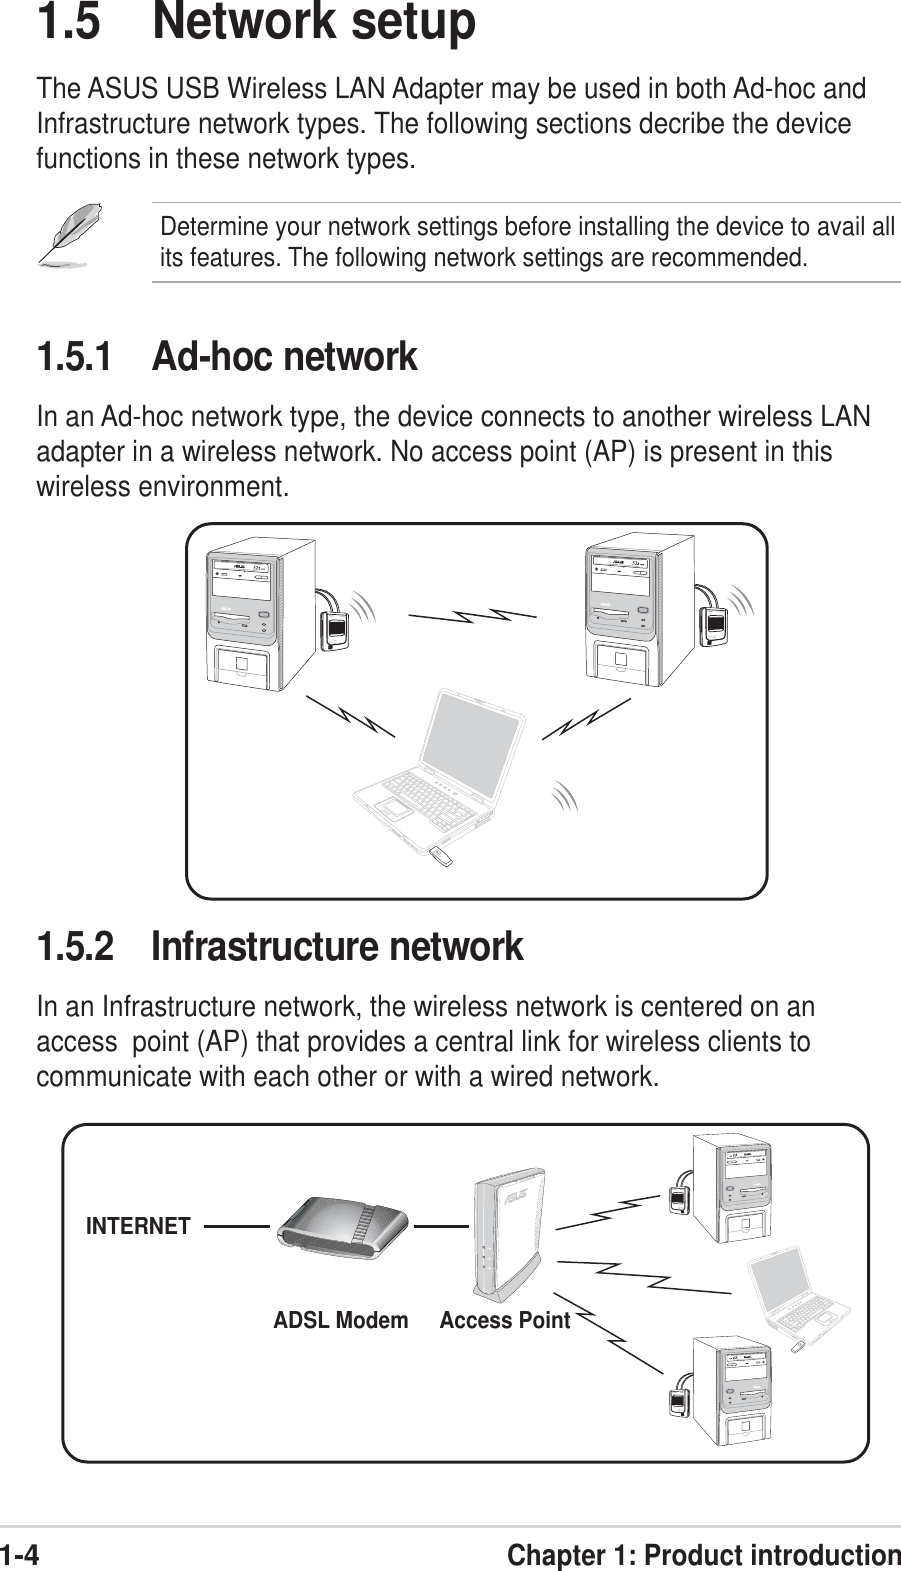 1-4Chapter 1: Product introduction1.5 Network setupThe ASUS USB Wireless LAN Adapter may be used in both Ad-hoc andInfrastructure network types. The following sections decribe the devicefunctions in these network types.1.5.1 Ad-hoc networkIn an Ad-hoc network type, the device connects to another wireless LANadapter in a wireless network. No access point (AP) is present in thiswireless environment.Determine your network settings before installing the device to avail allits features. The following network settings are recommended.1.5.2 Infrastructure networkIn an Infrastructure network, the wireless network is centered on anaccess  point (AP) that provides a central link for wireless clients tocommunicate with each other or with a wired network.INTERNETADSL Modem Access Point